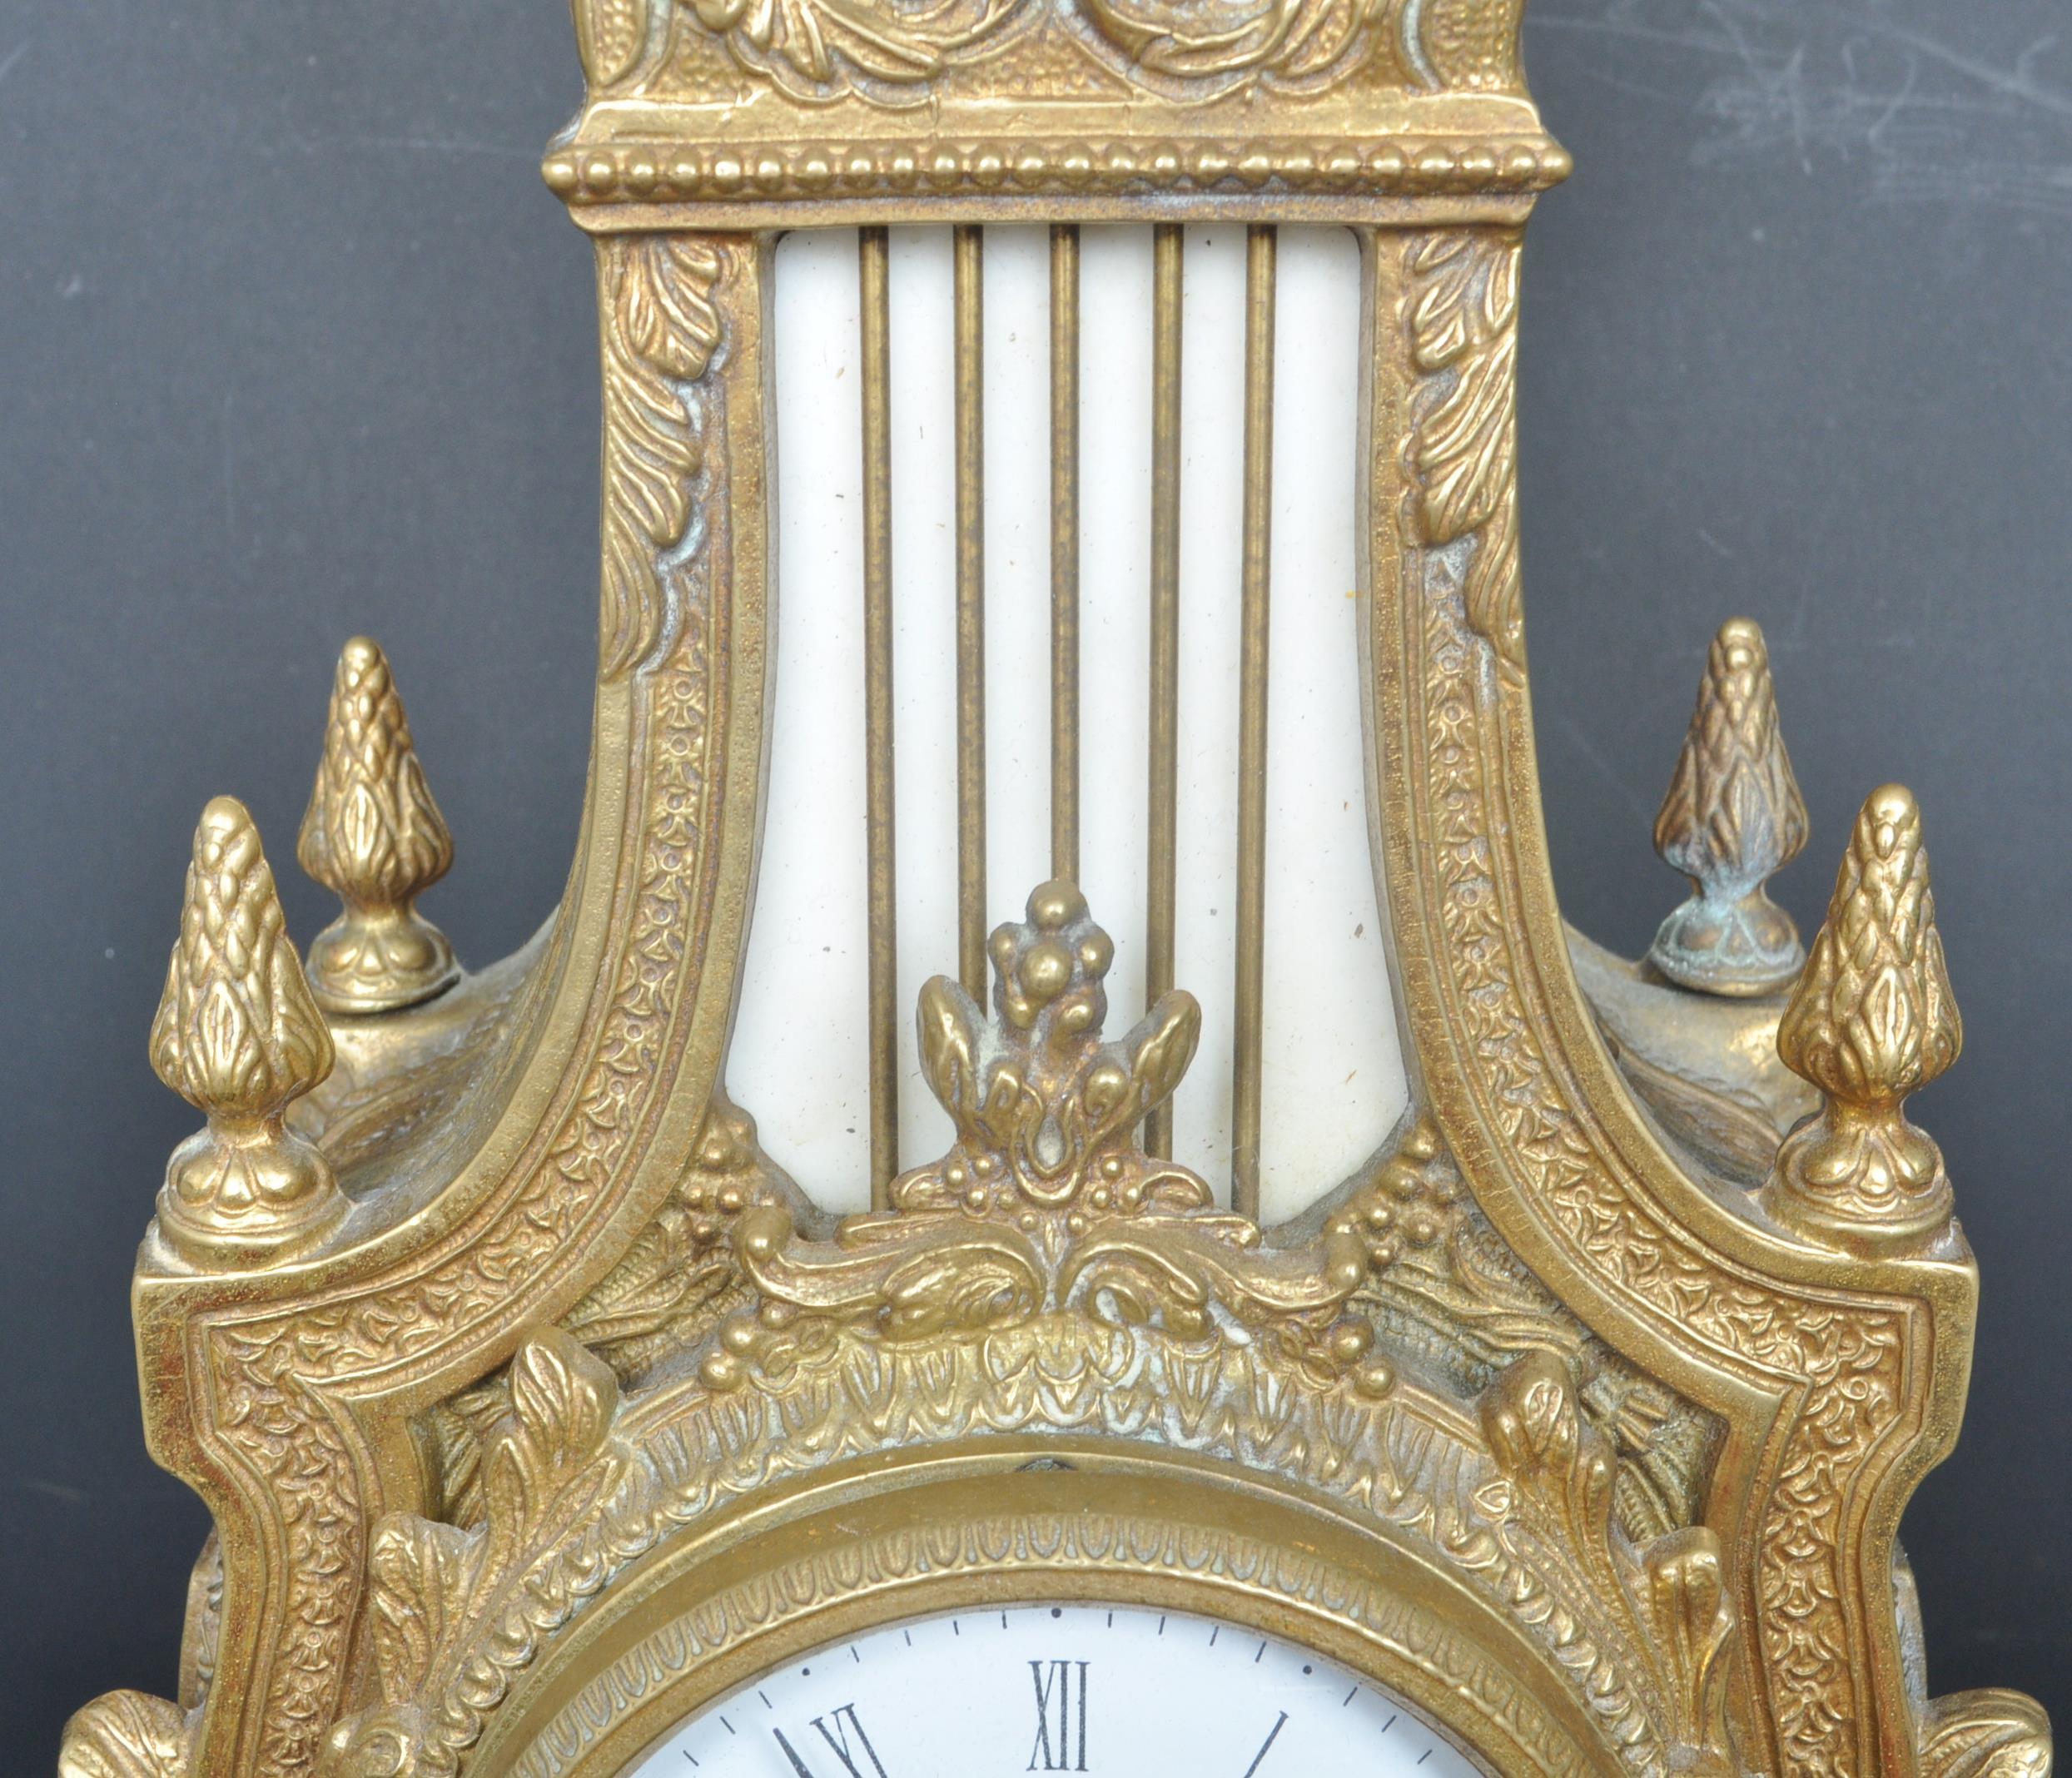 EARLY 20TH CENTURY GERMAN CONTINENTAL BRASS AND MARBLE CLOCK - Image 3 of 7